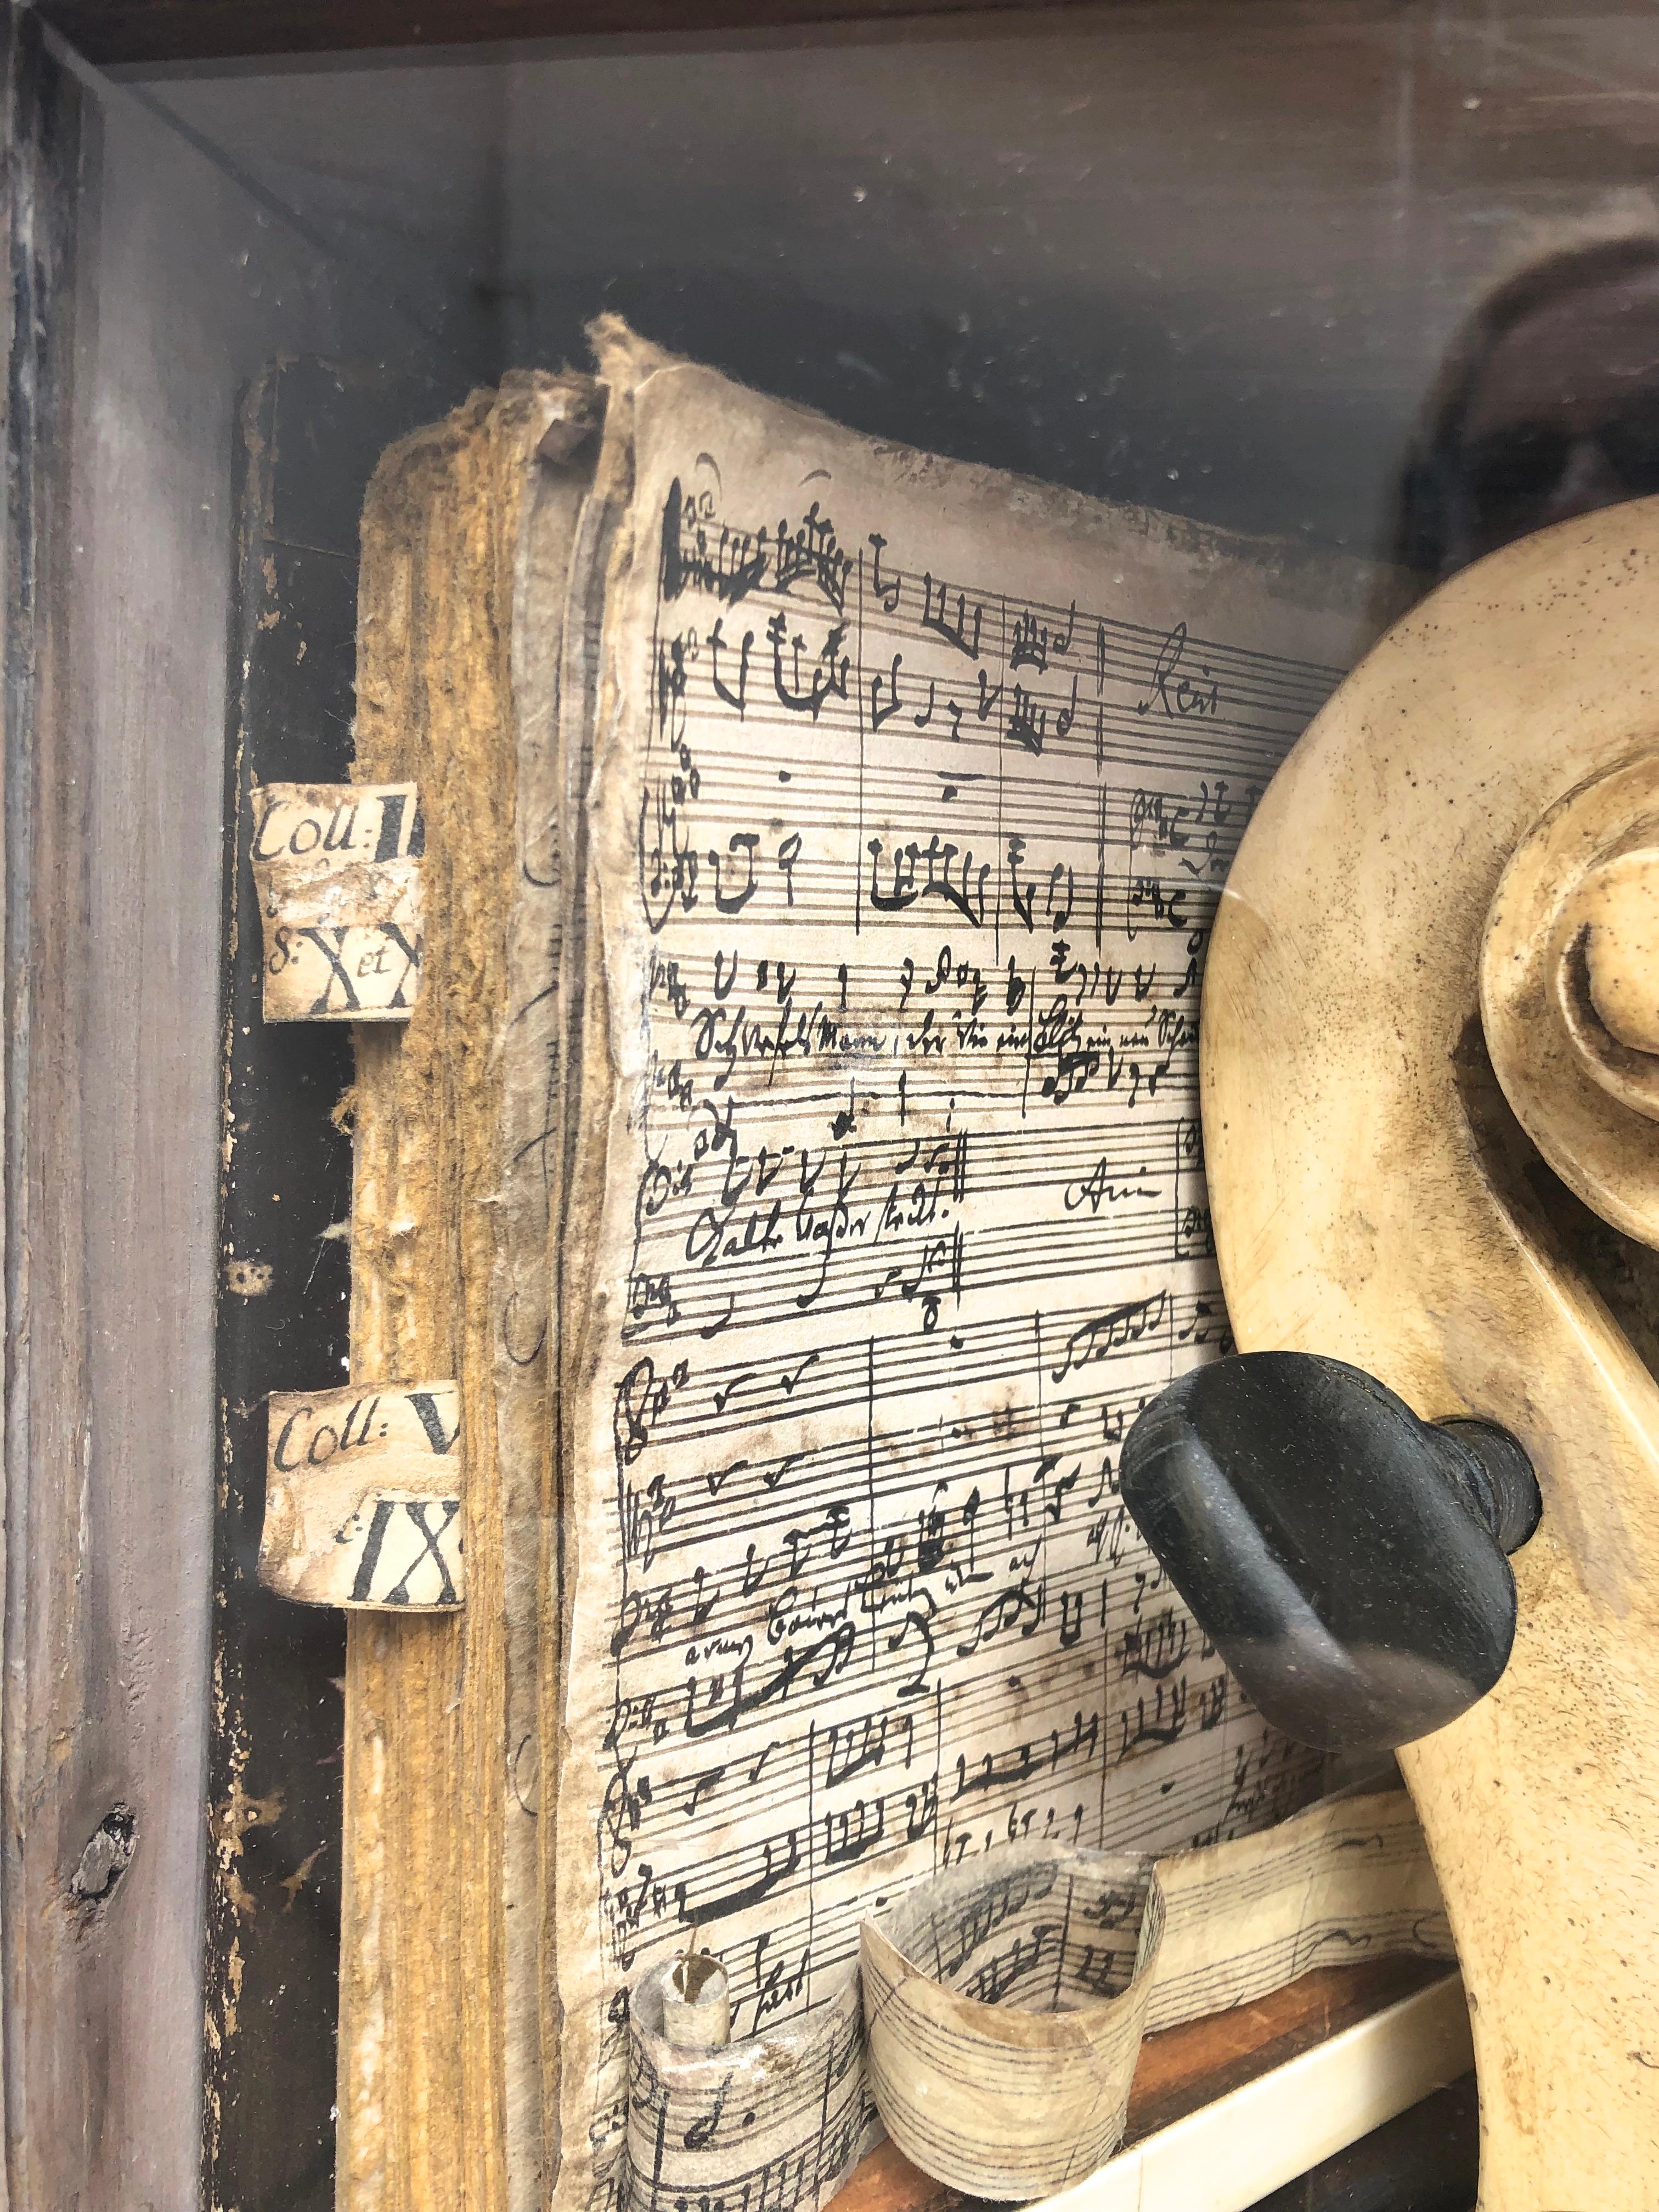 Musick Construction,  3d wall sculpture.
3D Construction/Assemblage, Mixed Media, wood, mixed media, 2019   Erikson often abandons the found object to create his own inventory of custom-made objects and fragments. Here the music manuscript, the